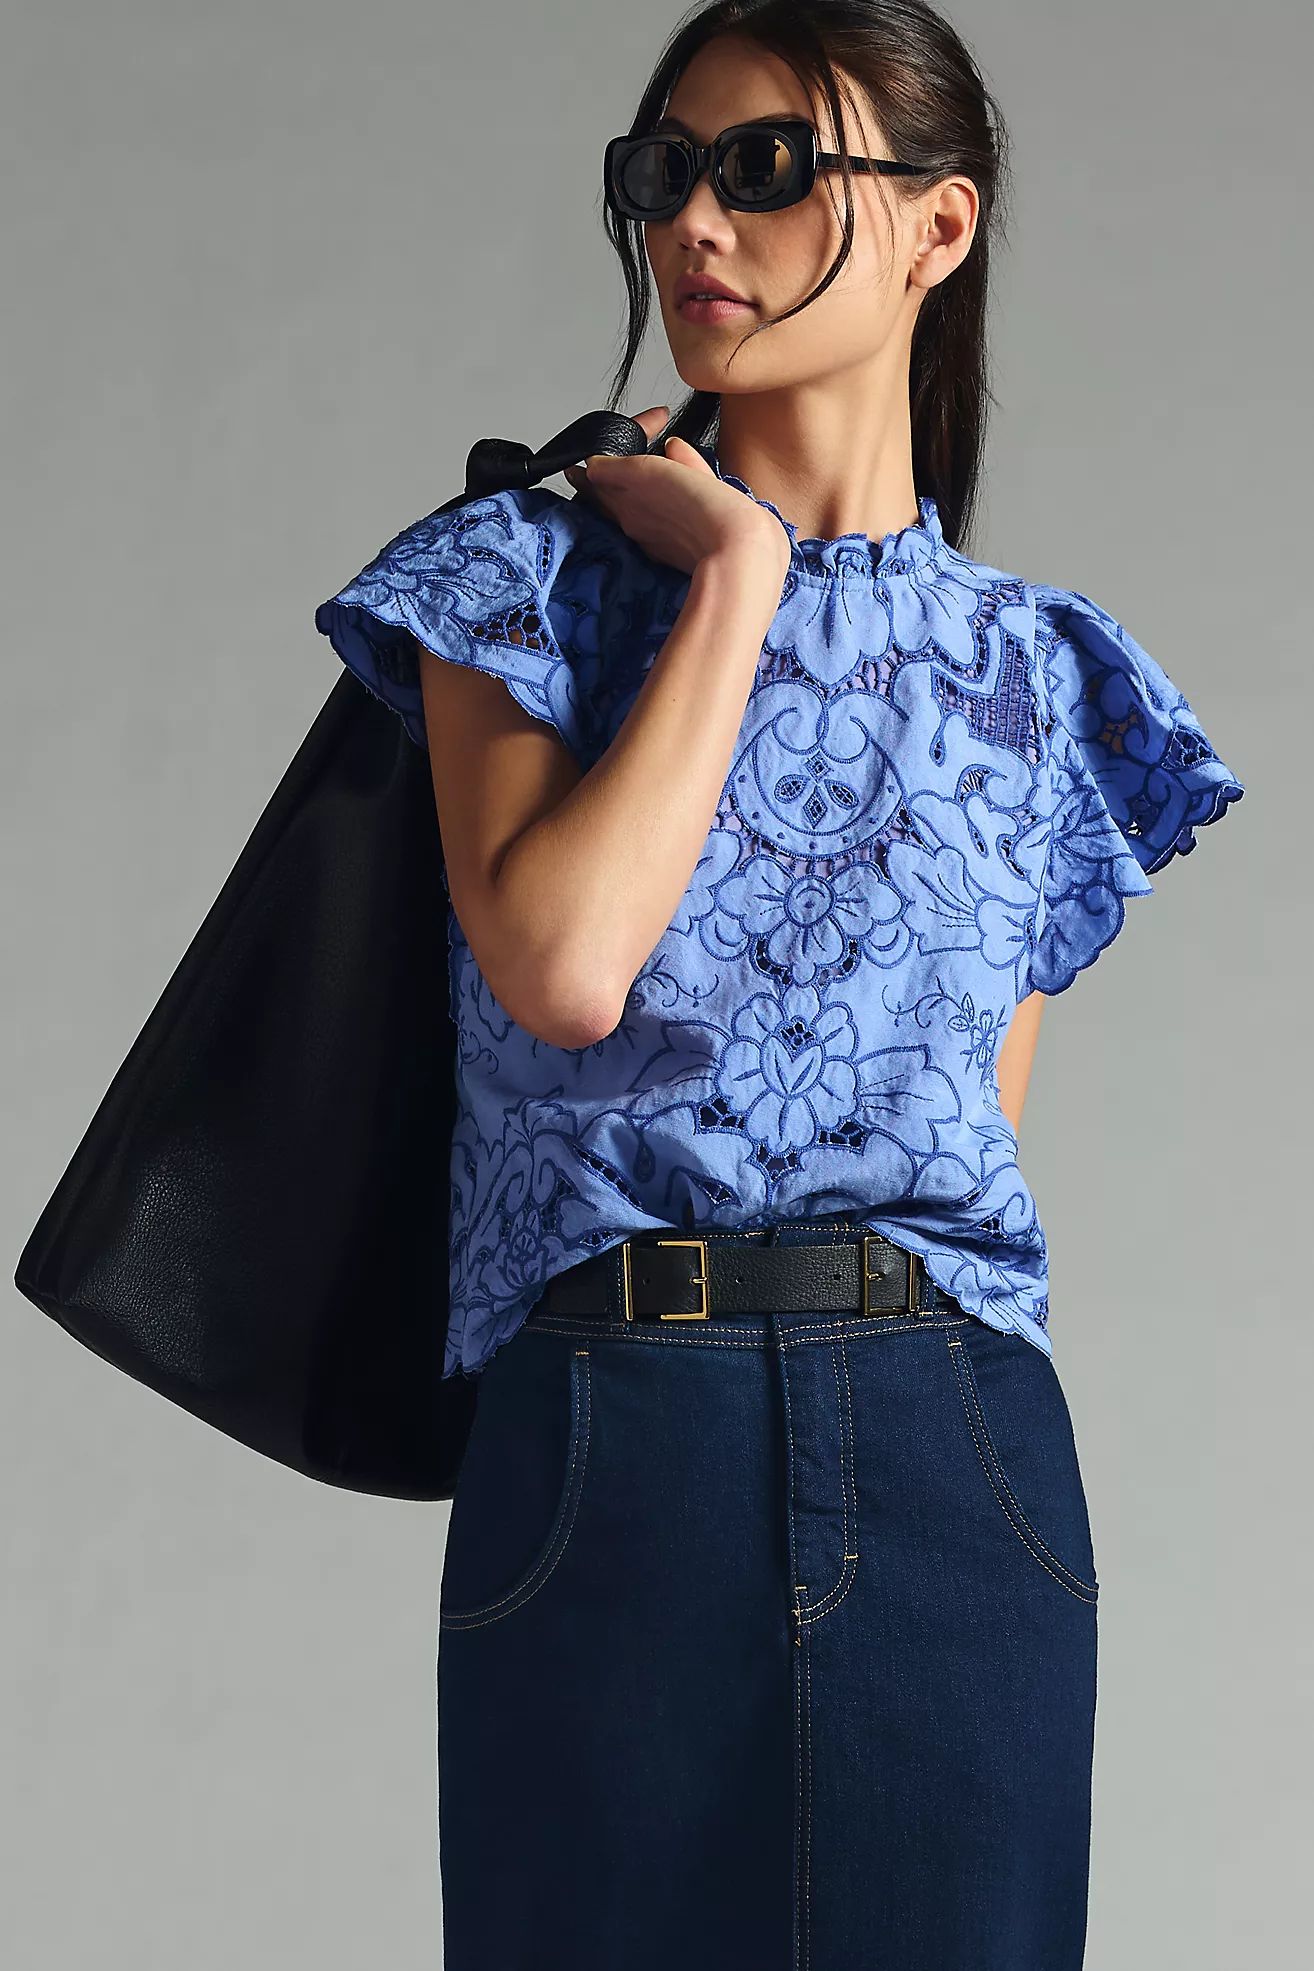 By Anthropologie Ruffle-Collar Lace Cutout Blouse | Anthropologie (US)